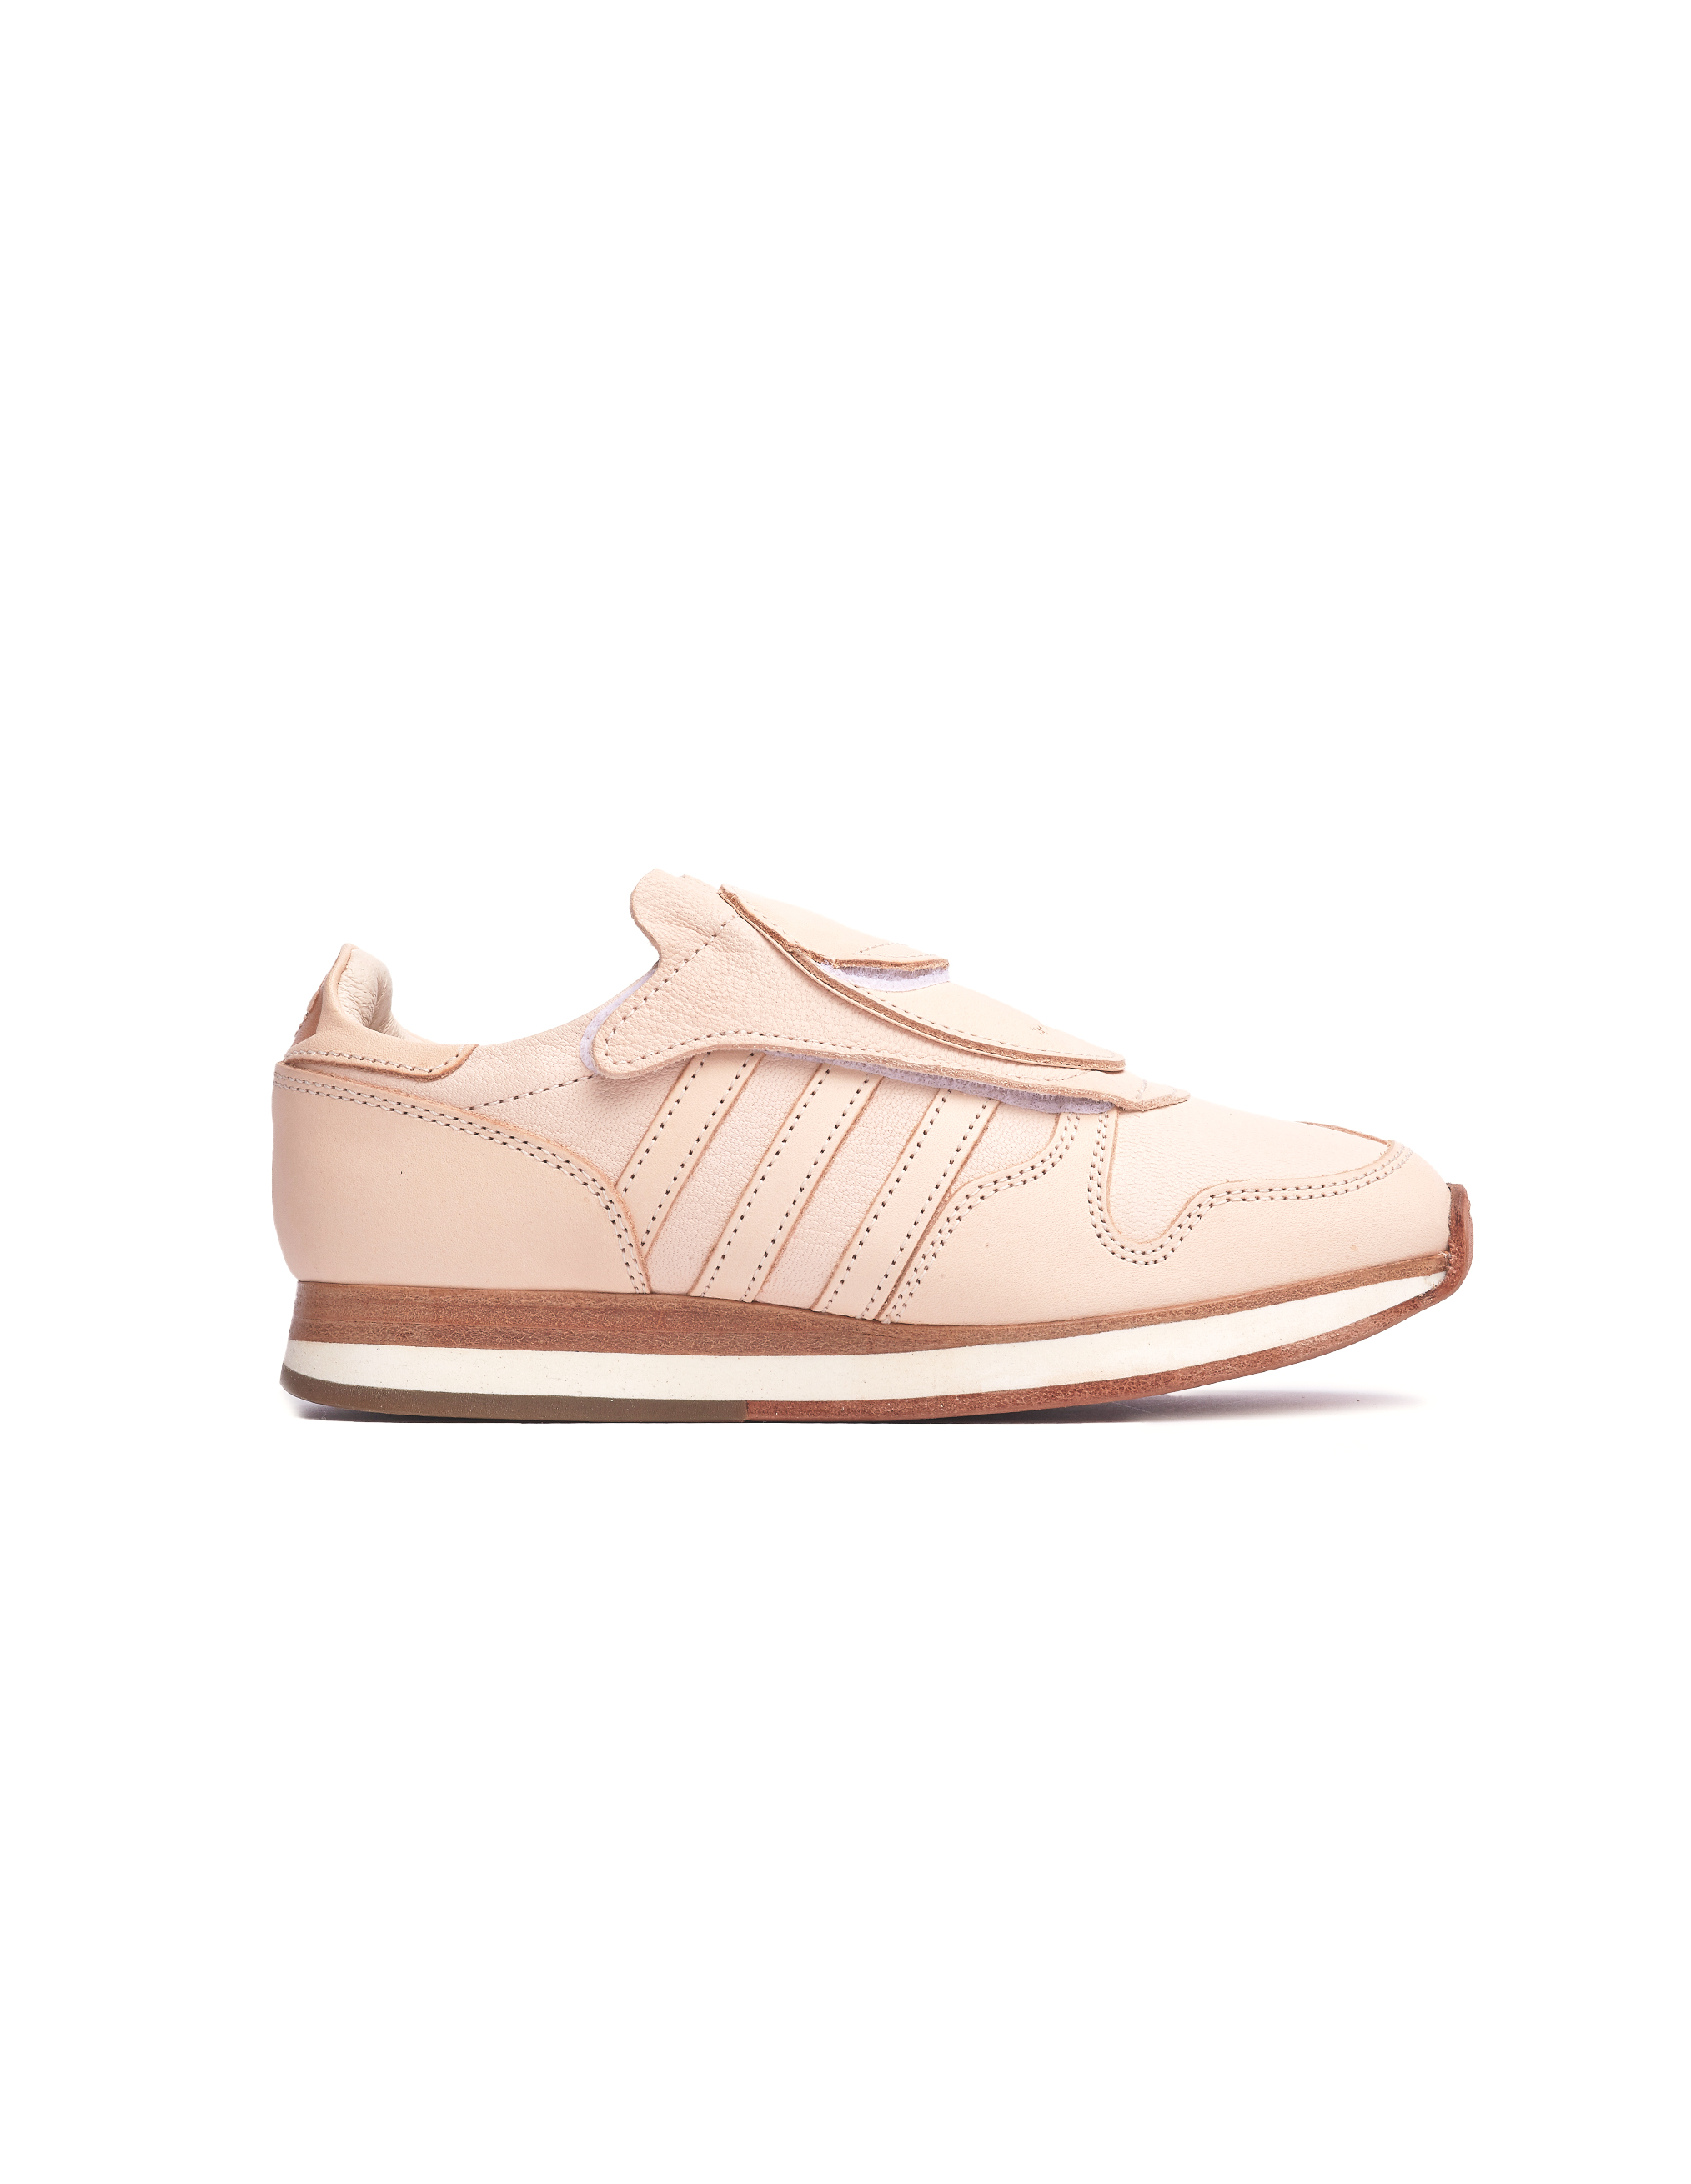 

Adidas Micropacer Leather Sneakers